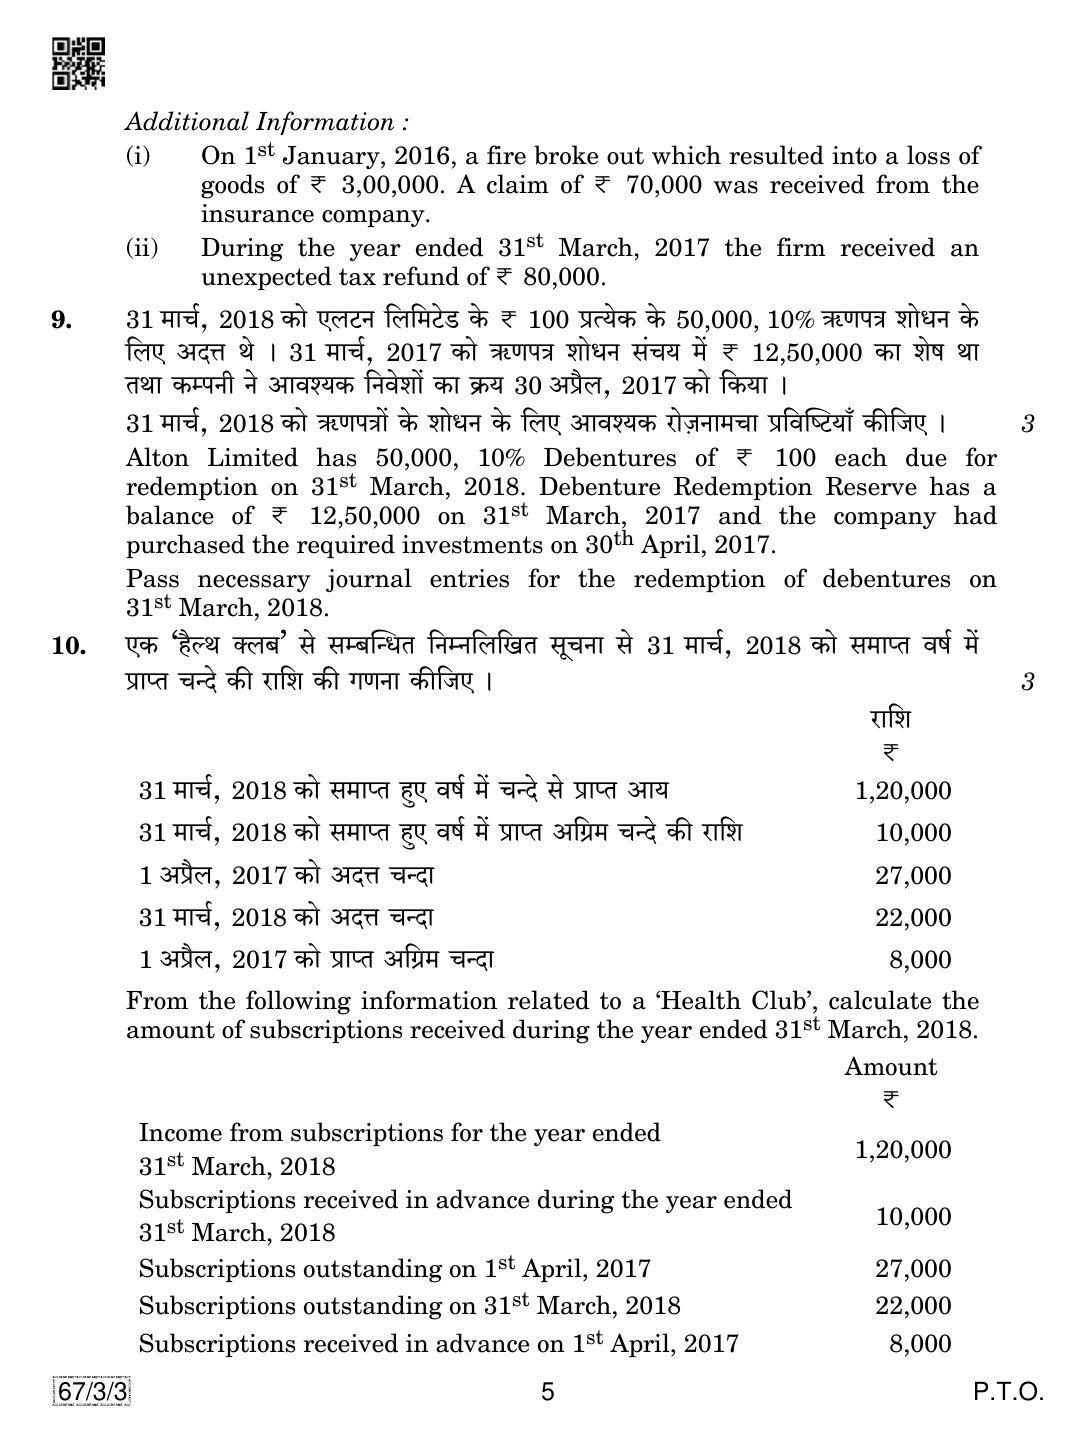 CBSE Class 12 67-3-3 Accountancy 2019 Question Paper - Page 5